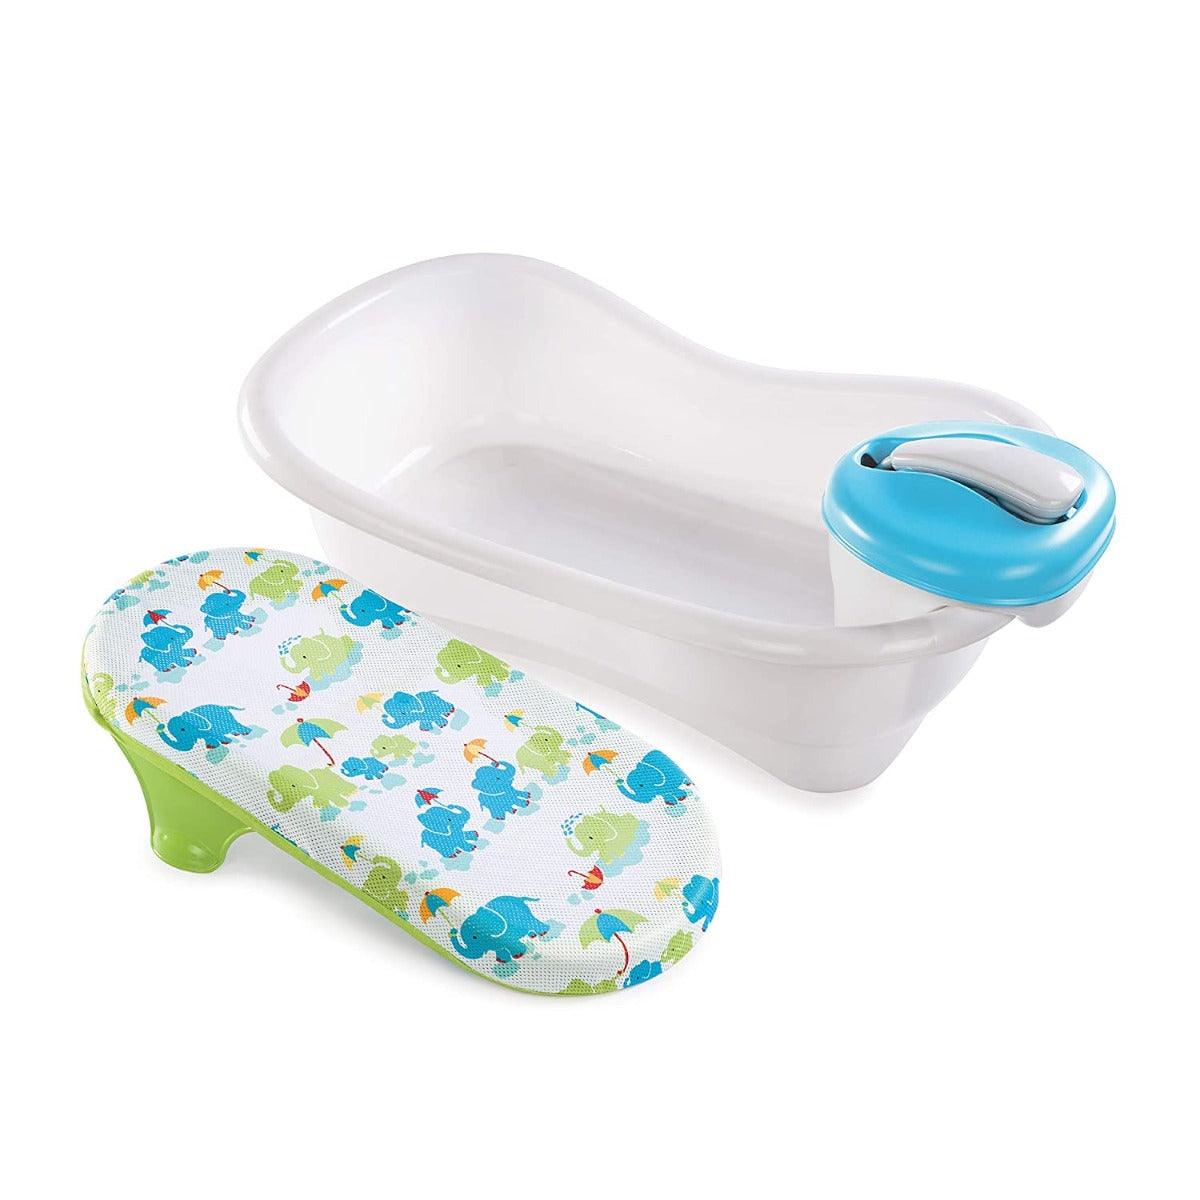 Summer Infant Newborn-To-Toddler Neutral - Bath Tub For Ages 0-12 Months